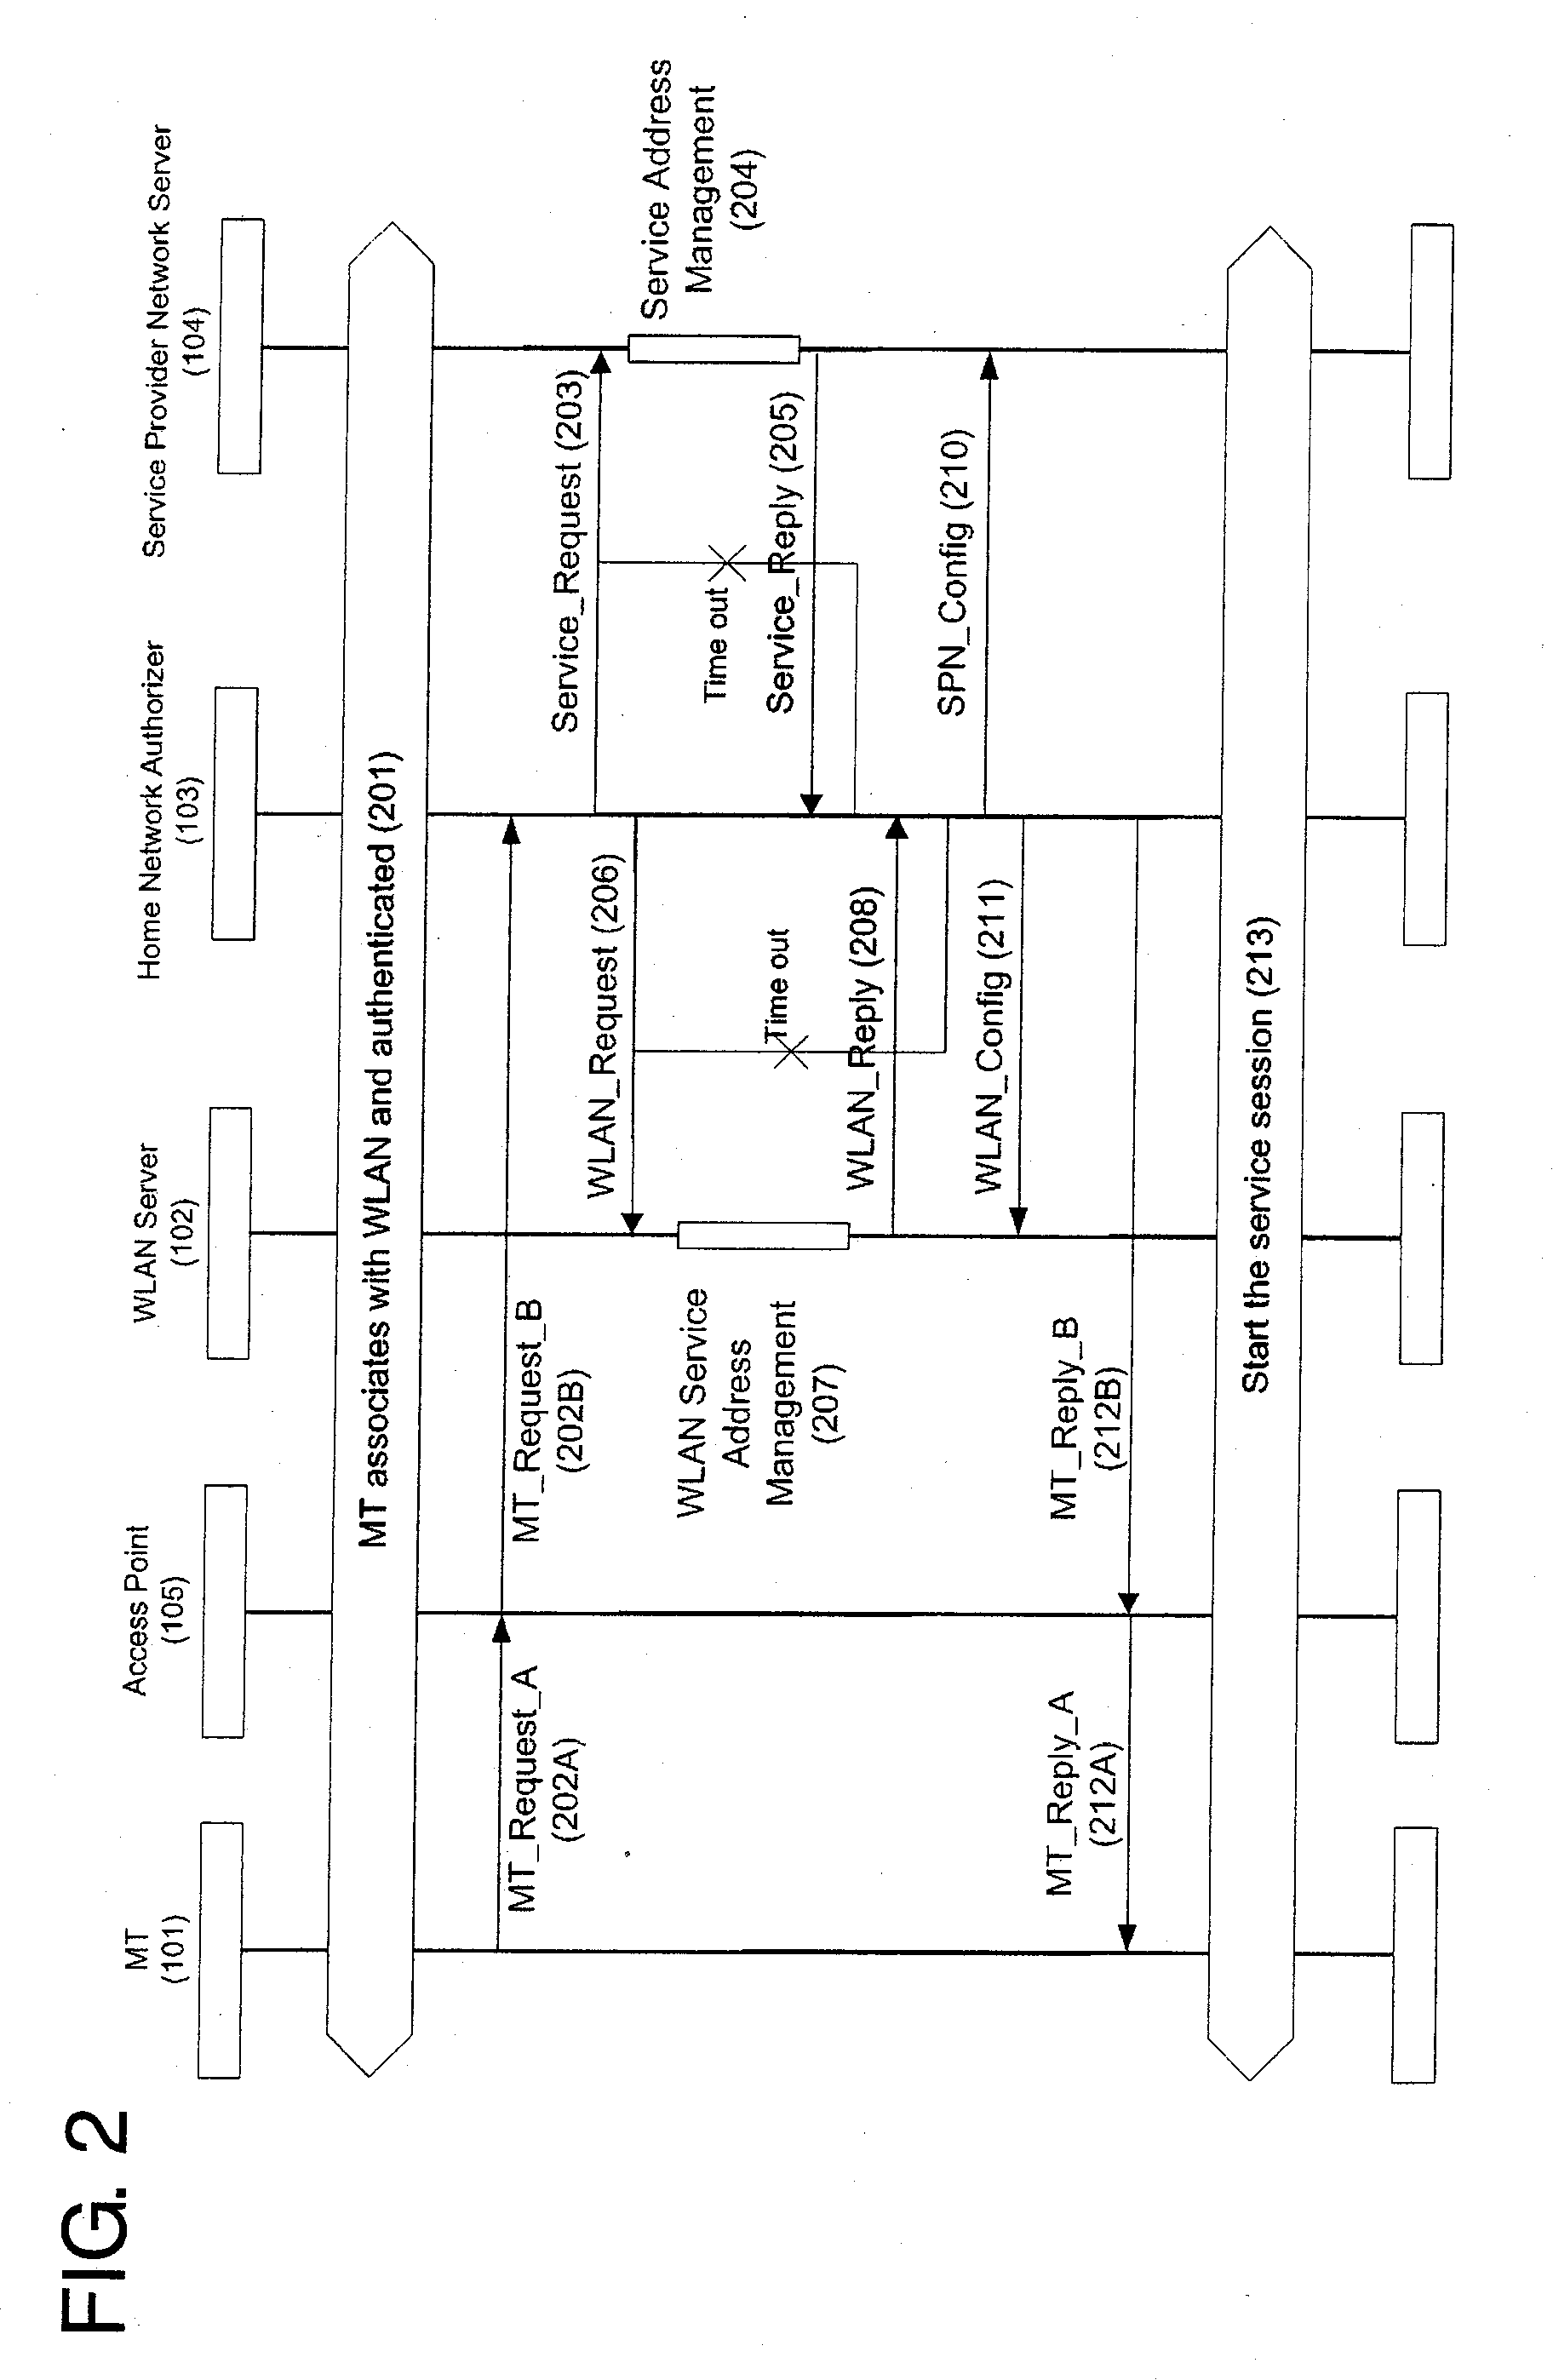 Service in WLAN inter-working, address management system, and method